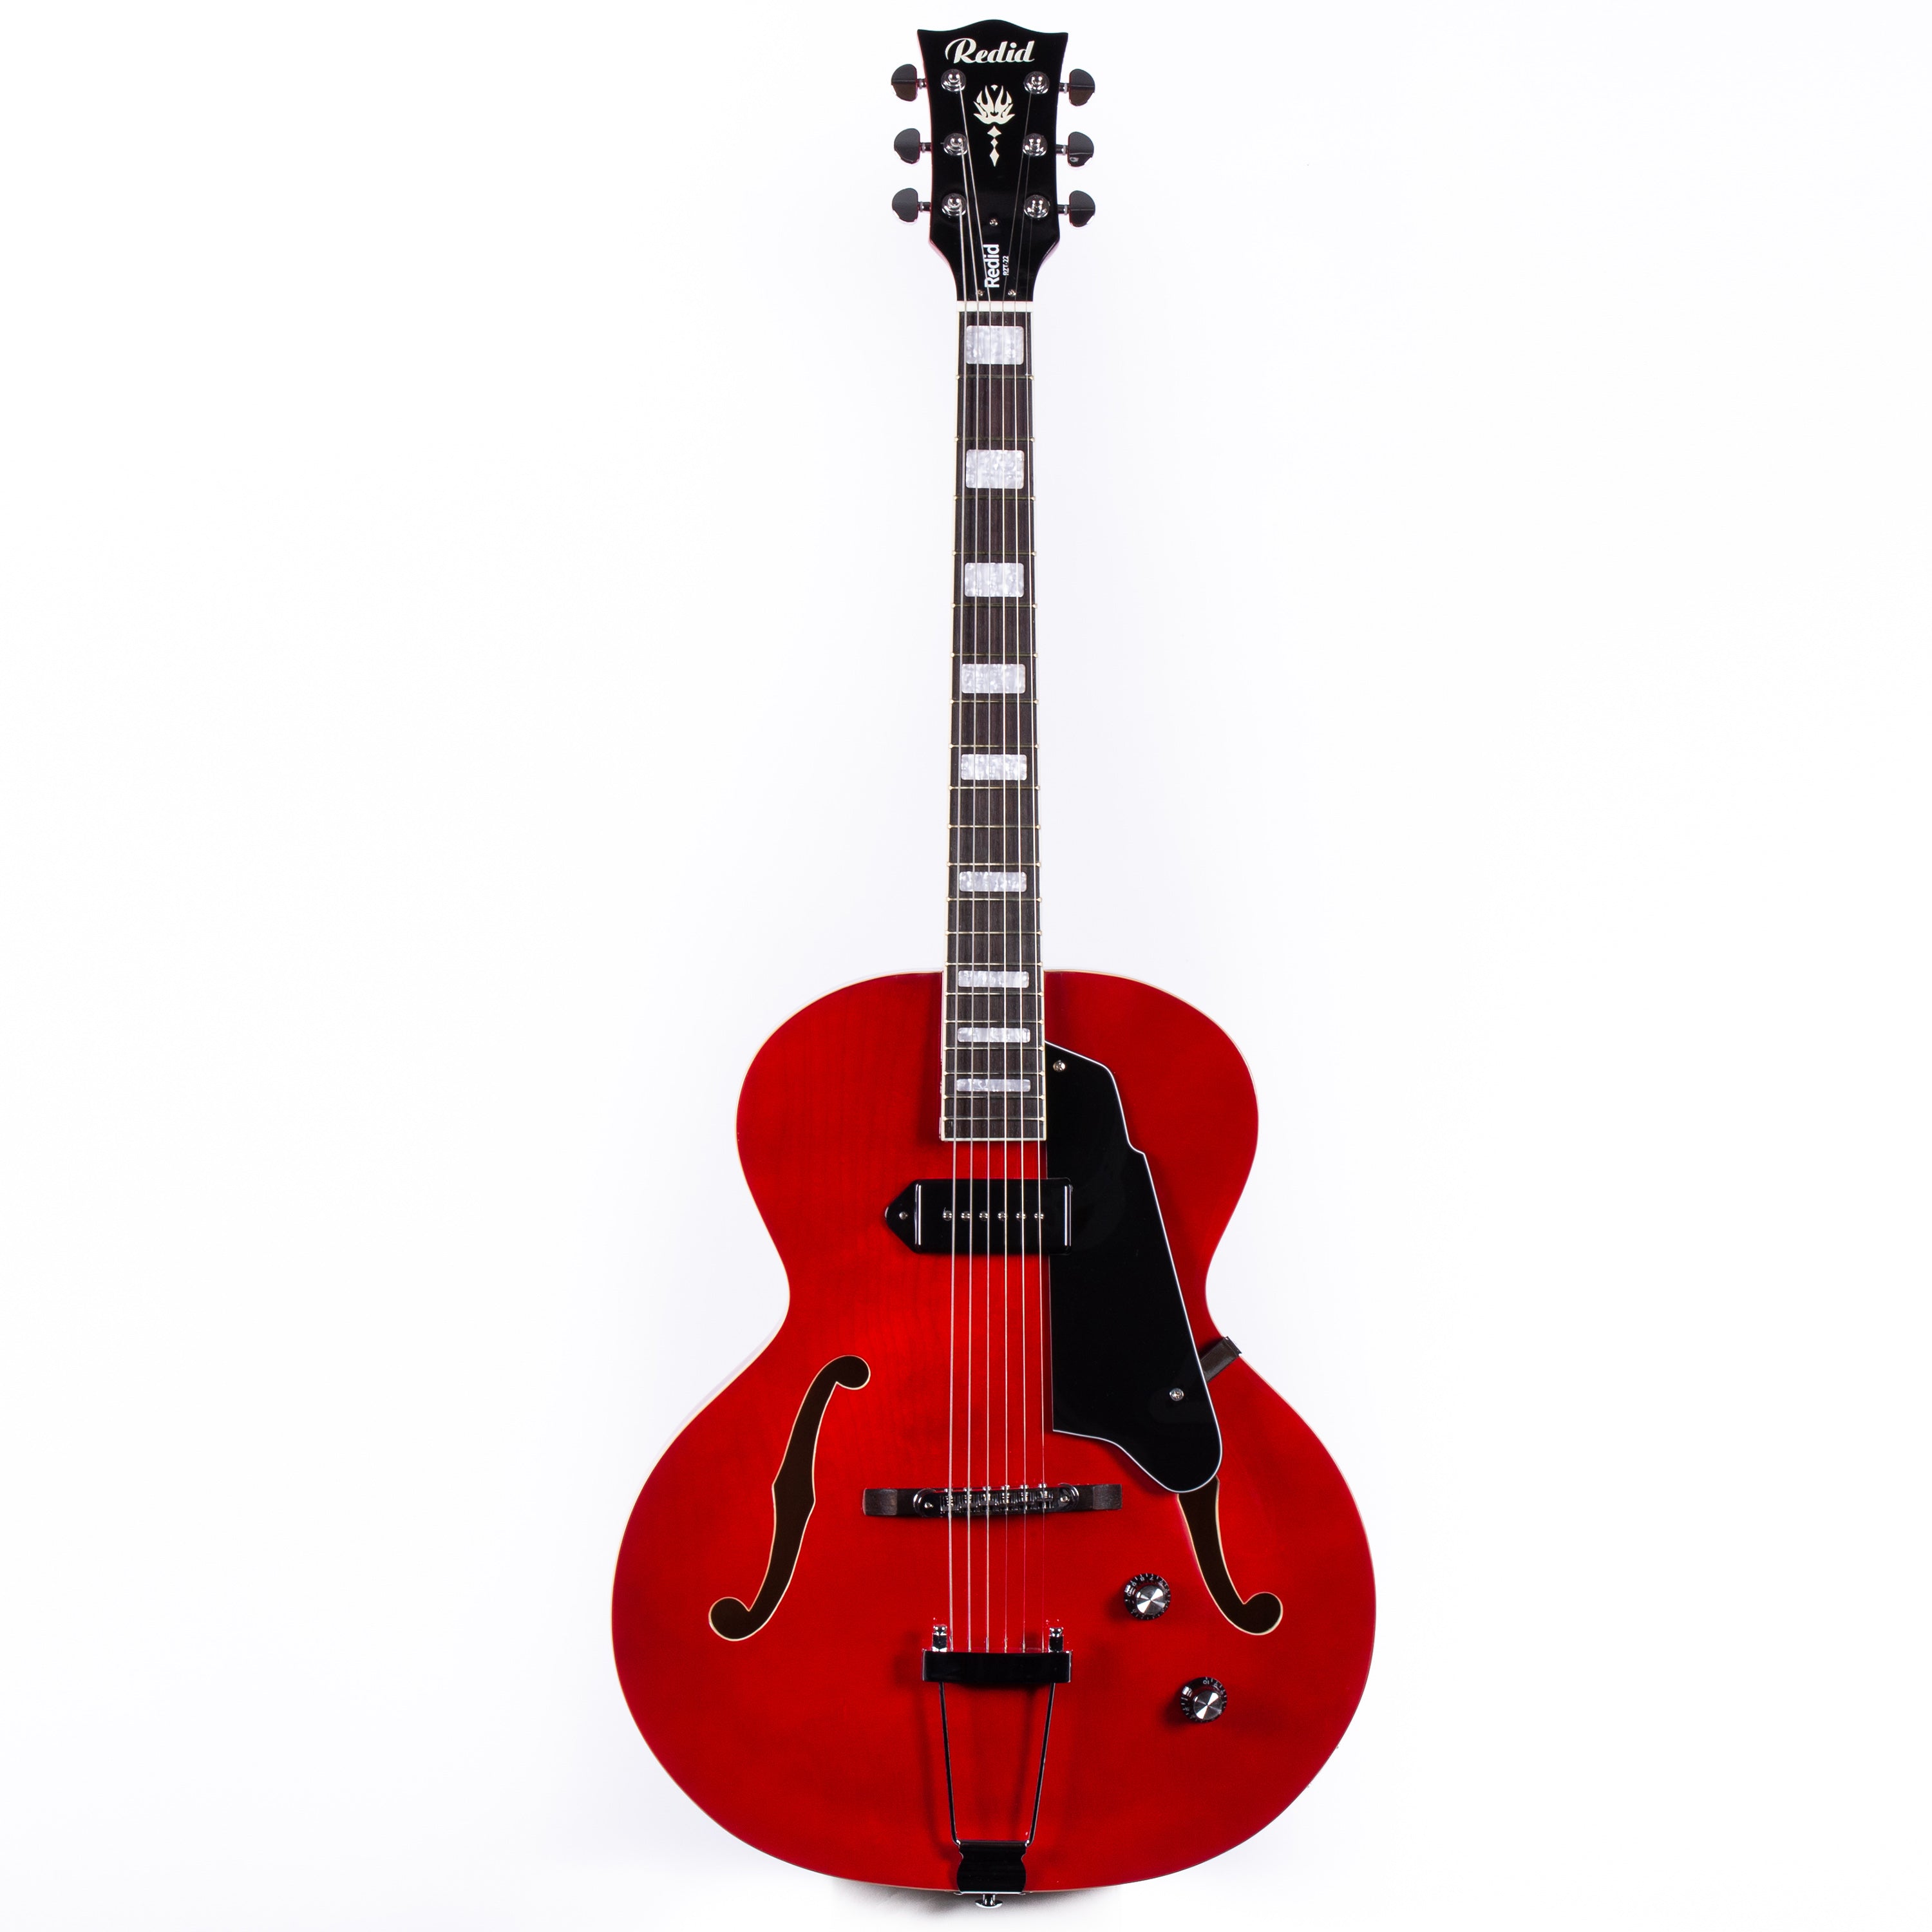 Redid RZT-22 Electric Guitar Classic Thinline Semi-Hollow-body Archtop P-90  single-coil pickup